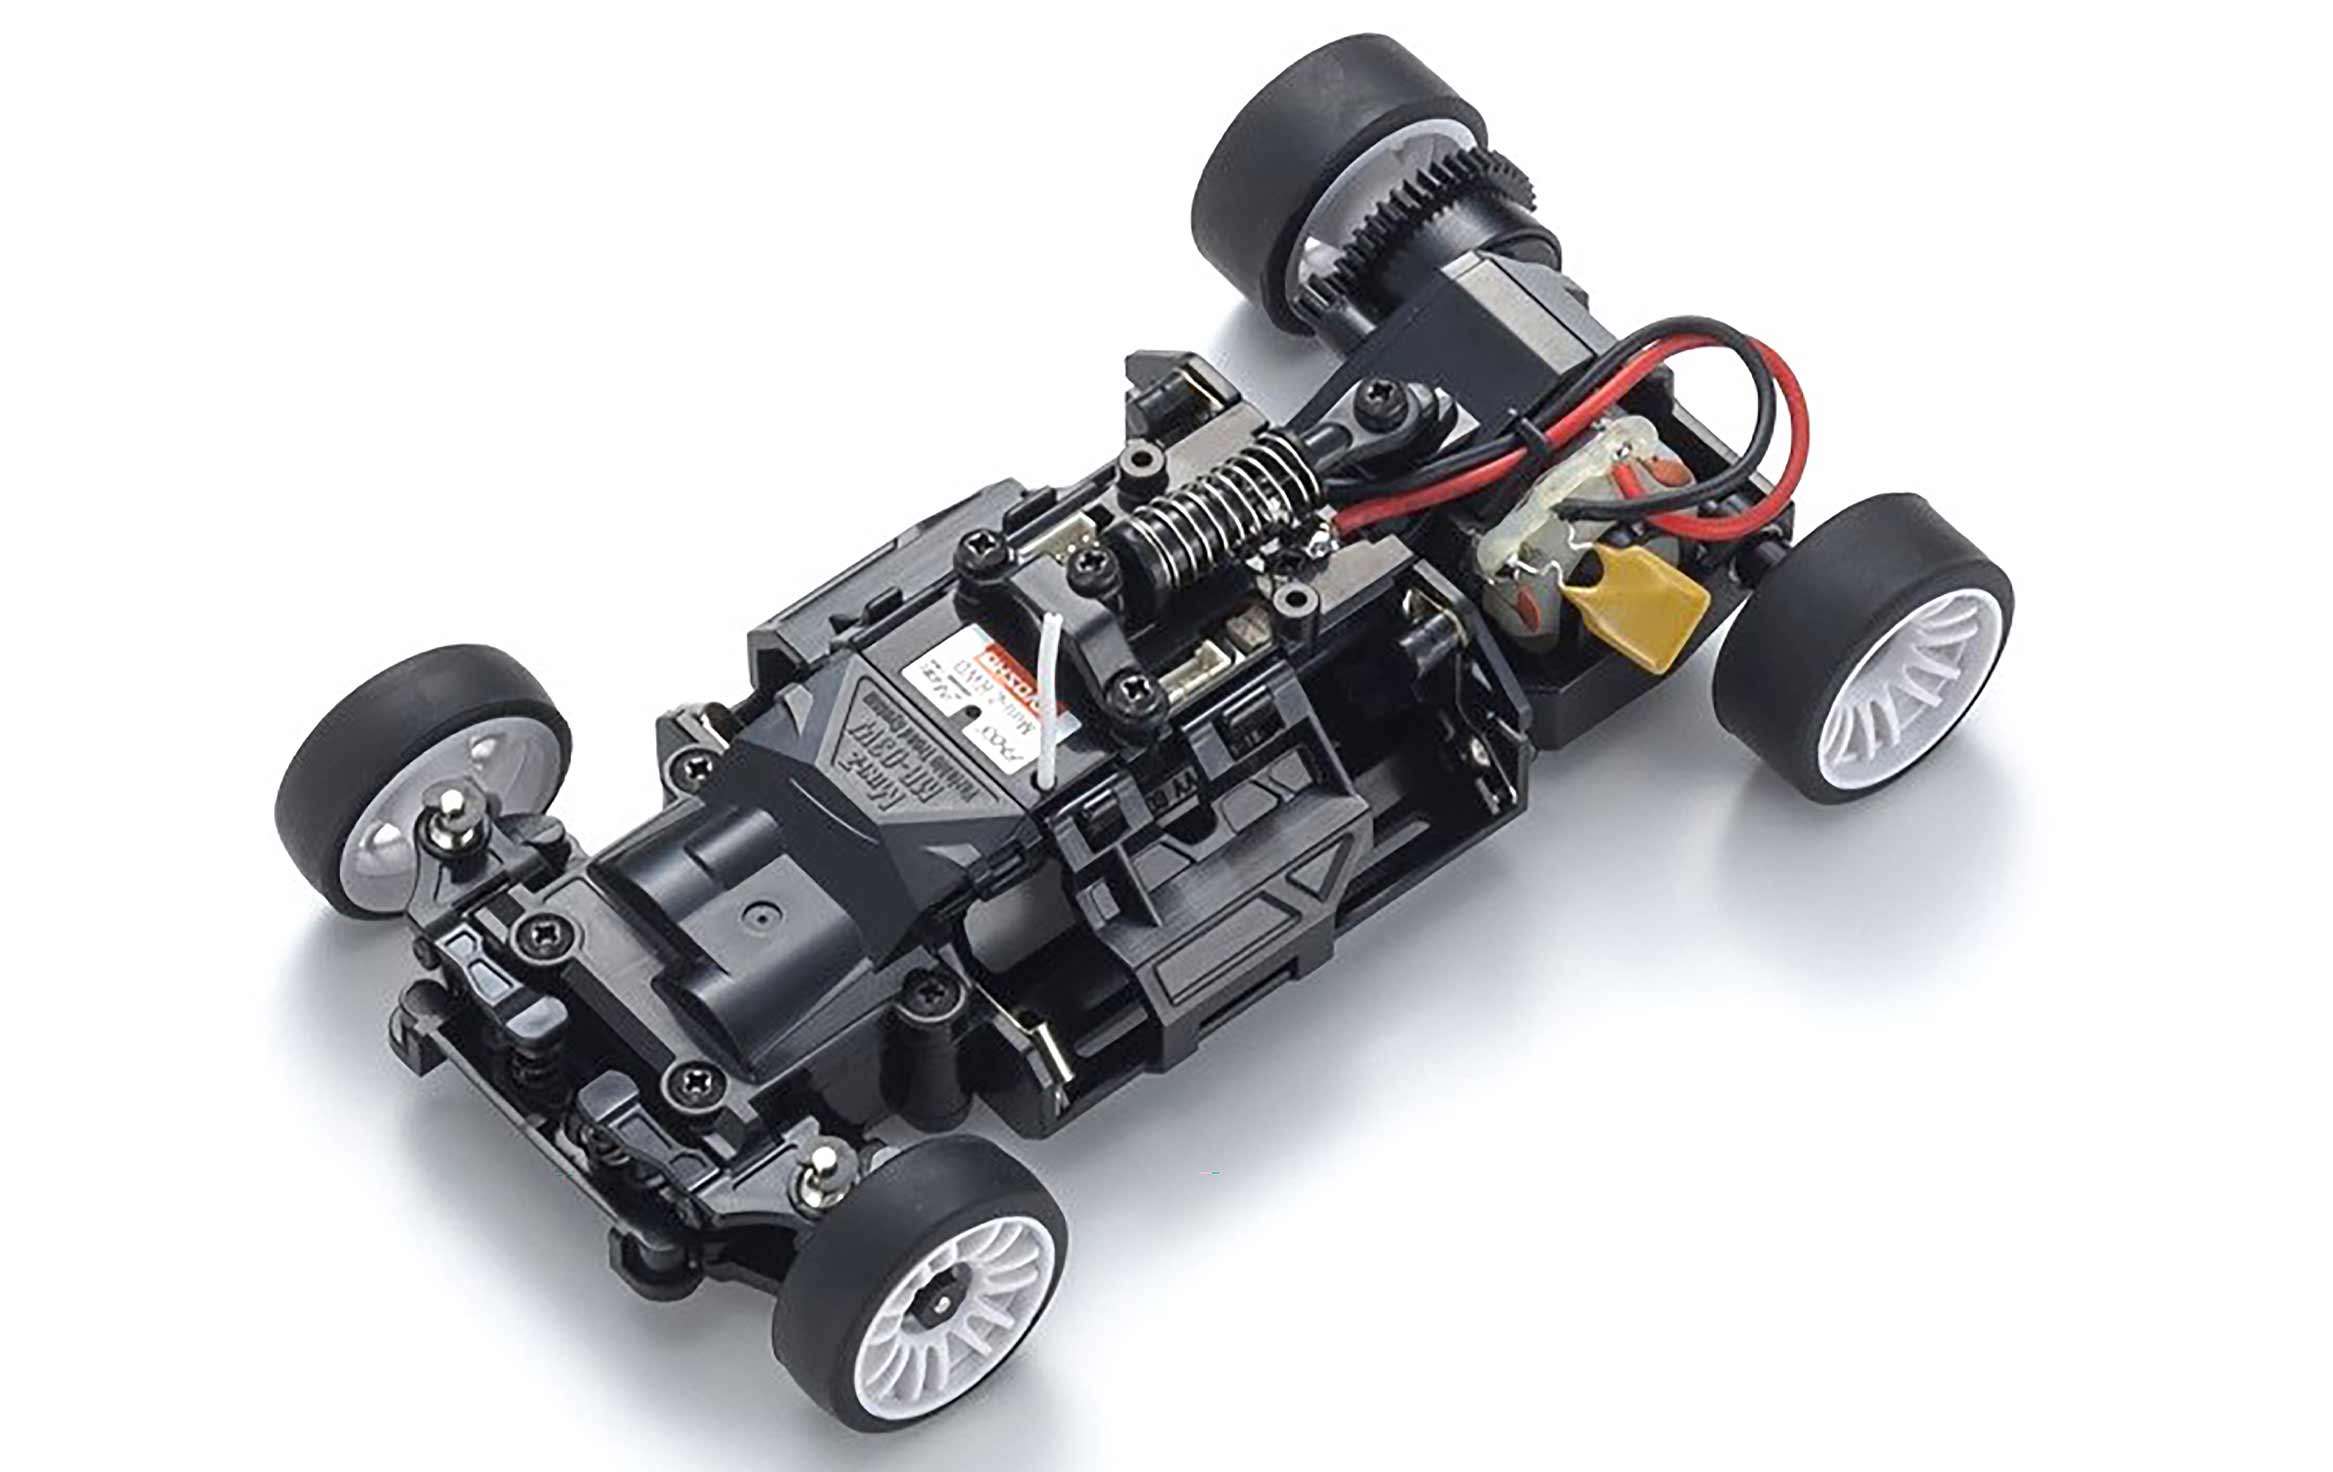 MR-03 Chassis